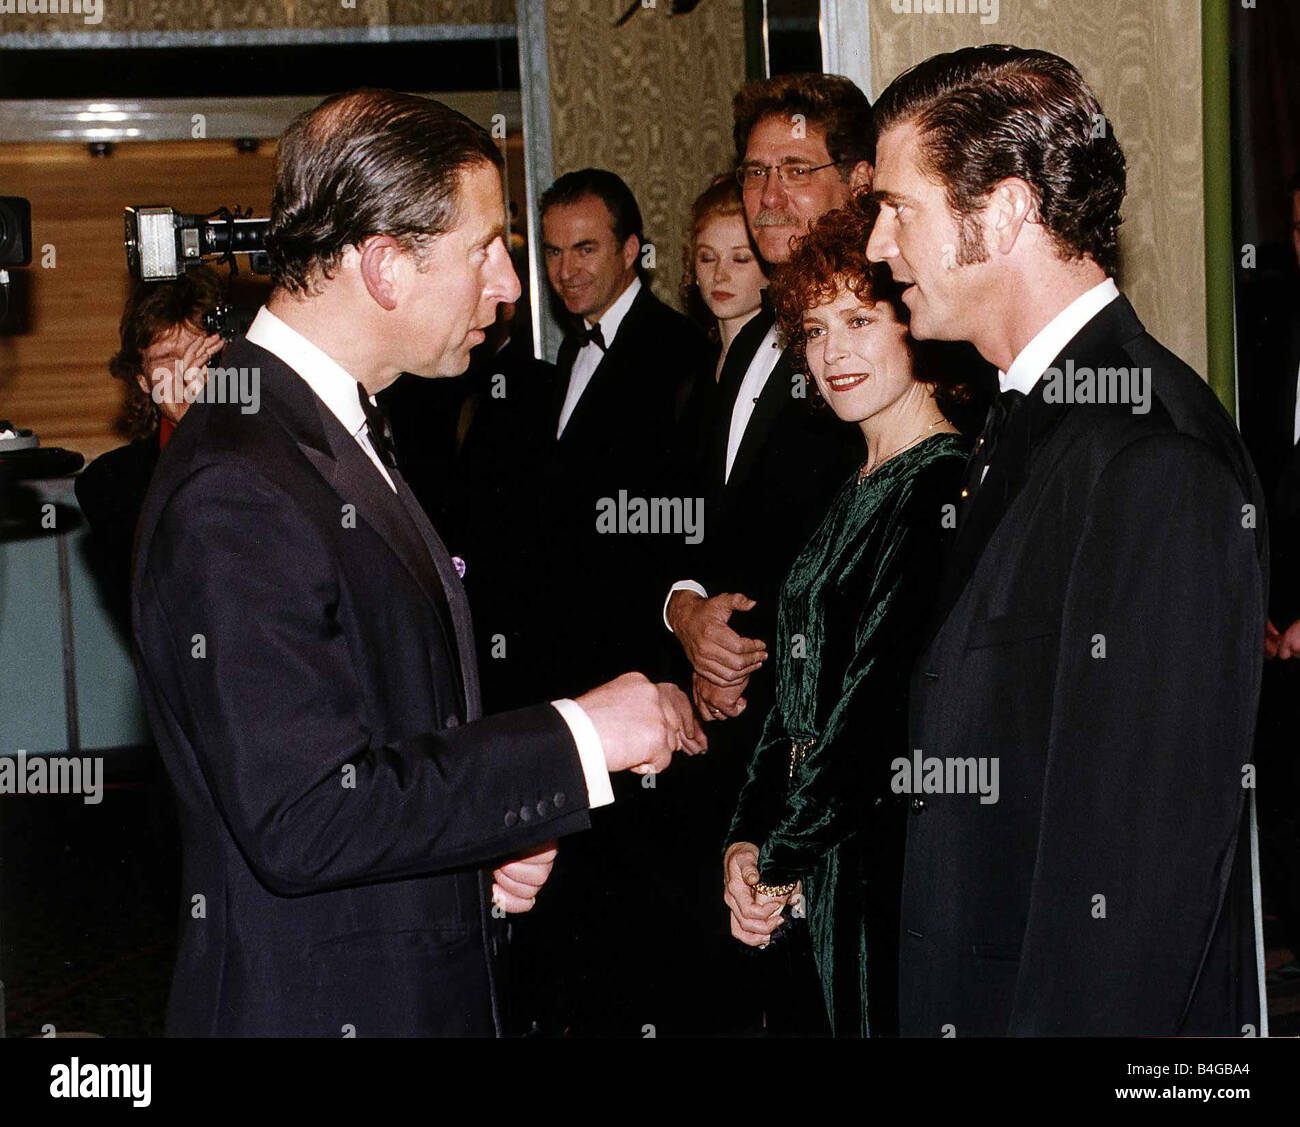 Mel Gibson actor speaking to Prince Charles at the premiere of his film Man without a face Stock Photo